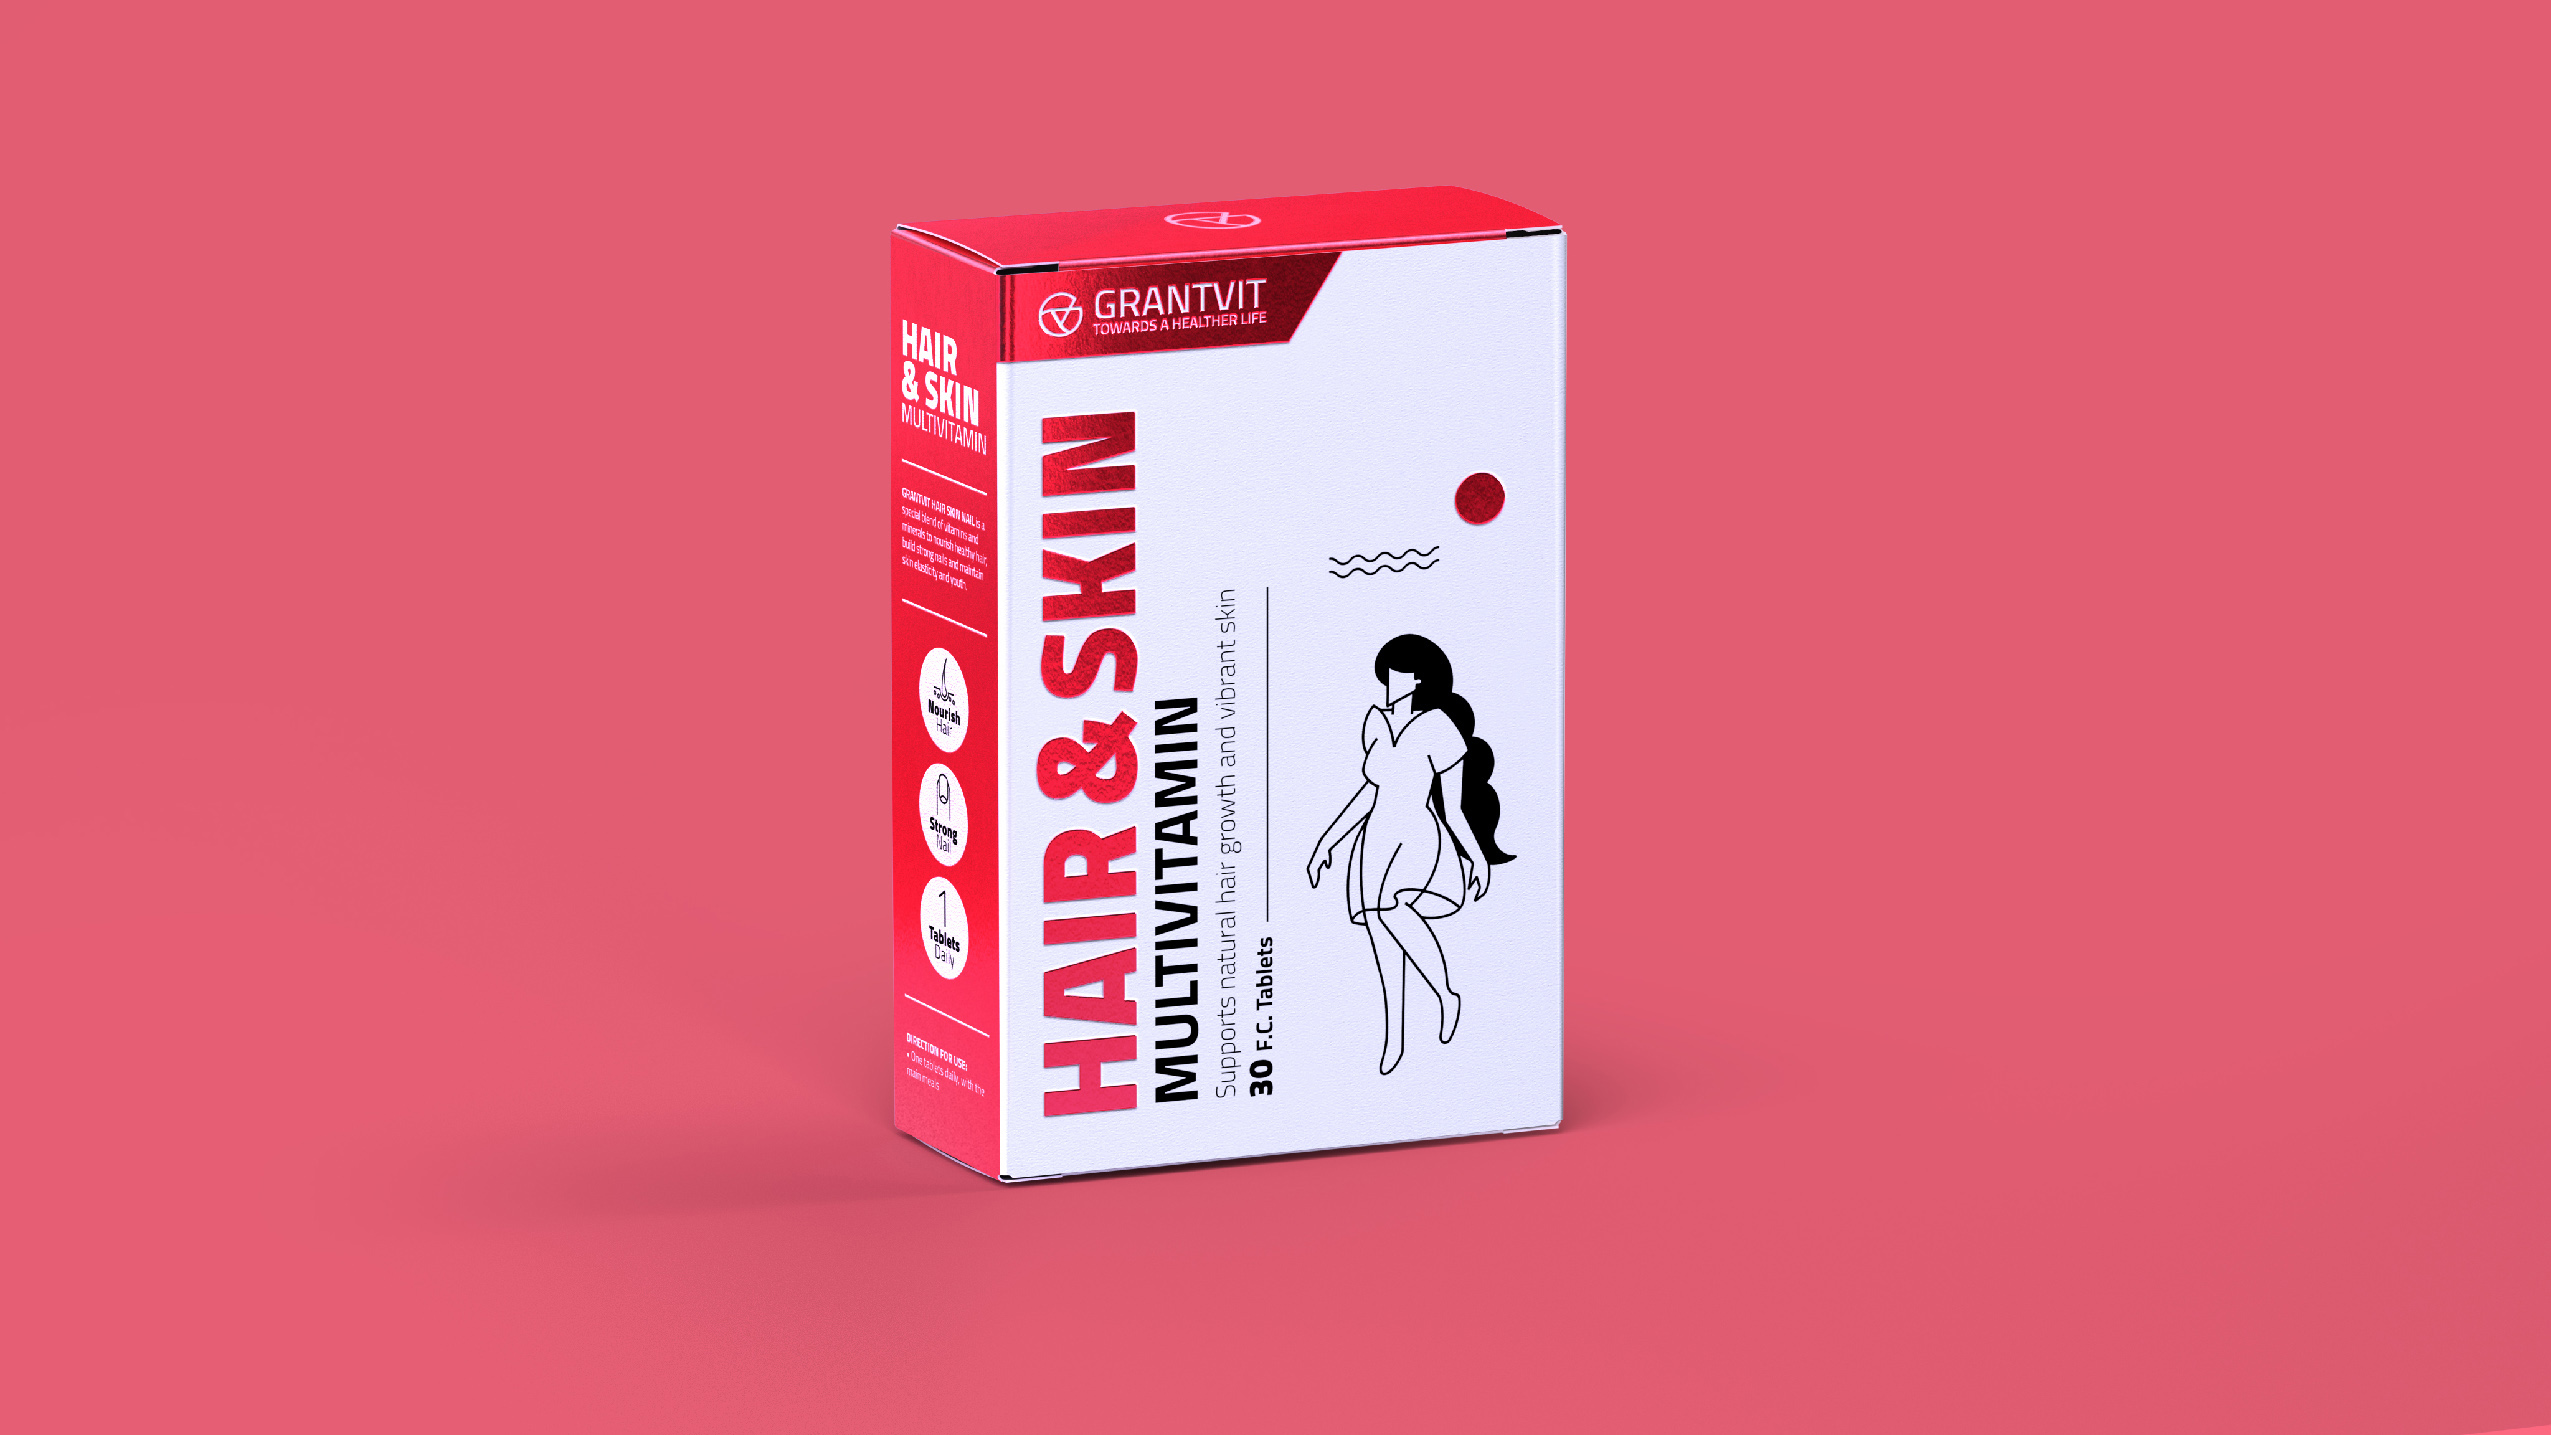 Supplements Packaging Design with Characters of the City